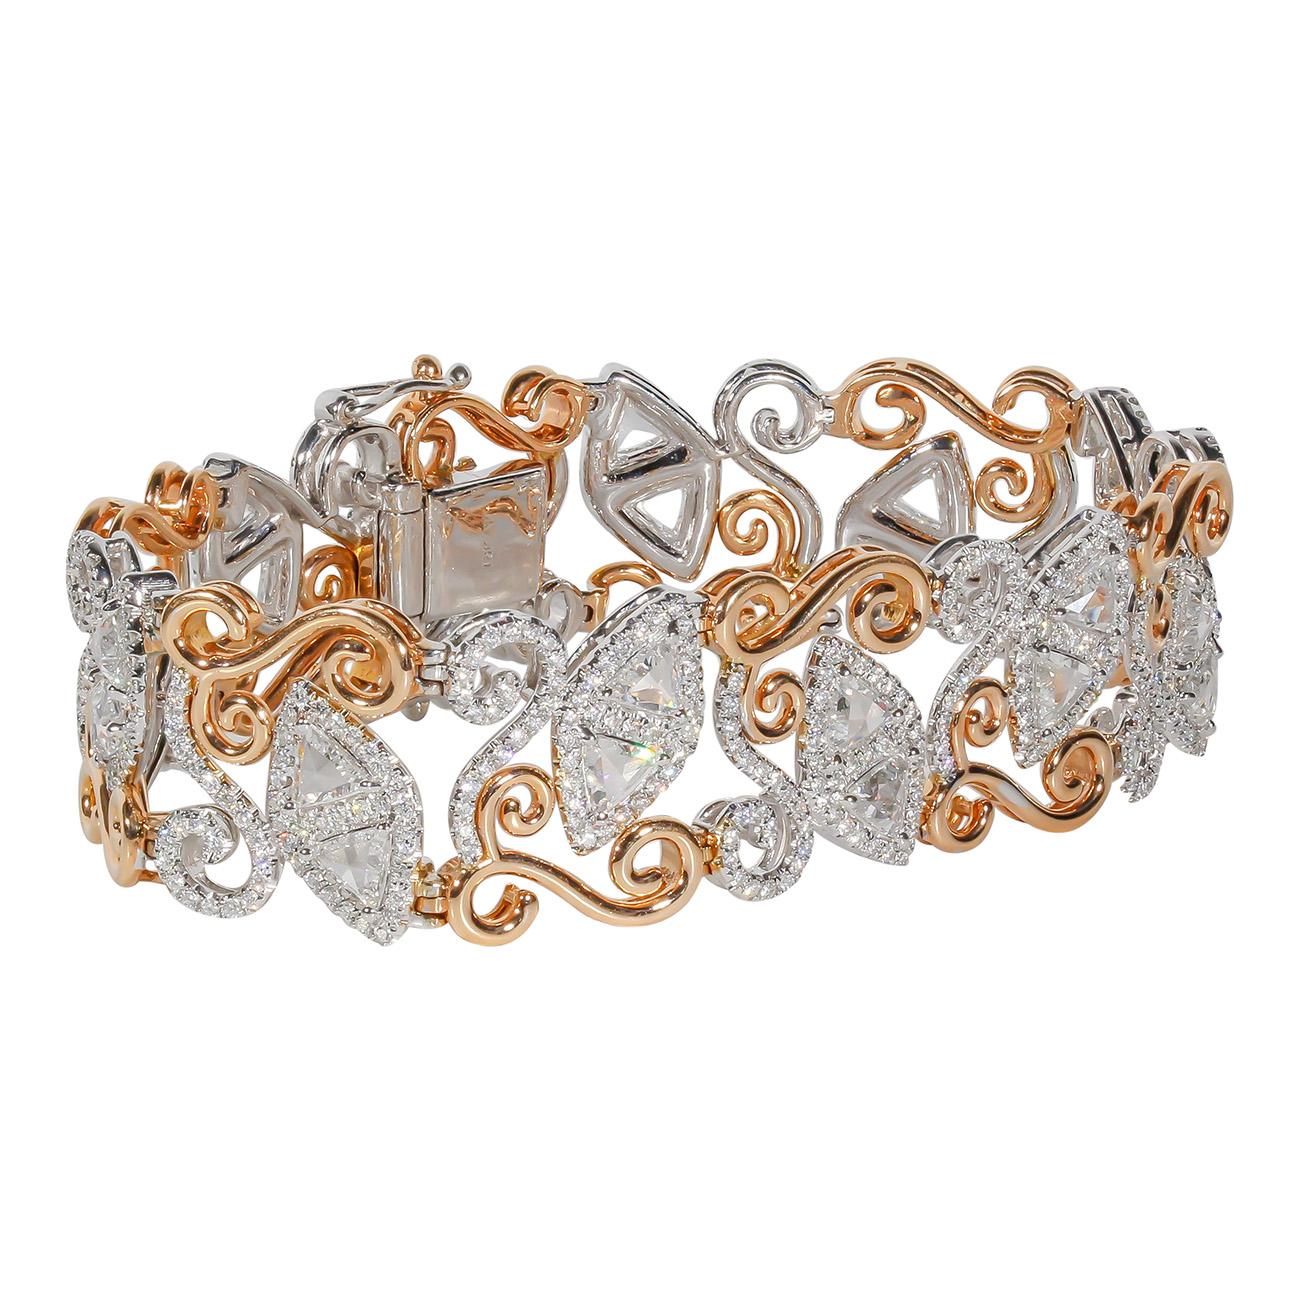 Designer bracelet in 18K two-tone with swirly rose gold lining, French pave set rounds around prong set trilliant cut diamonds.  D7.94ct.t.w.